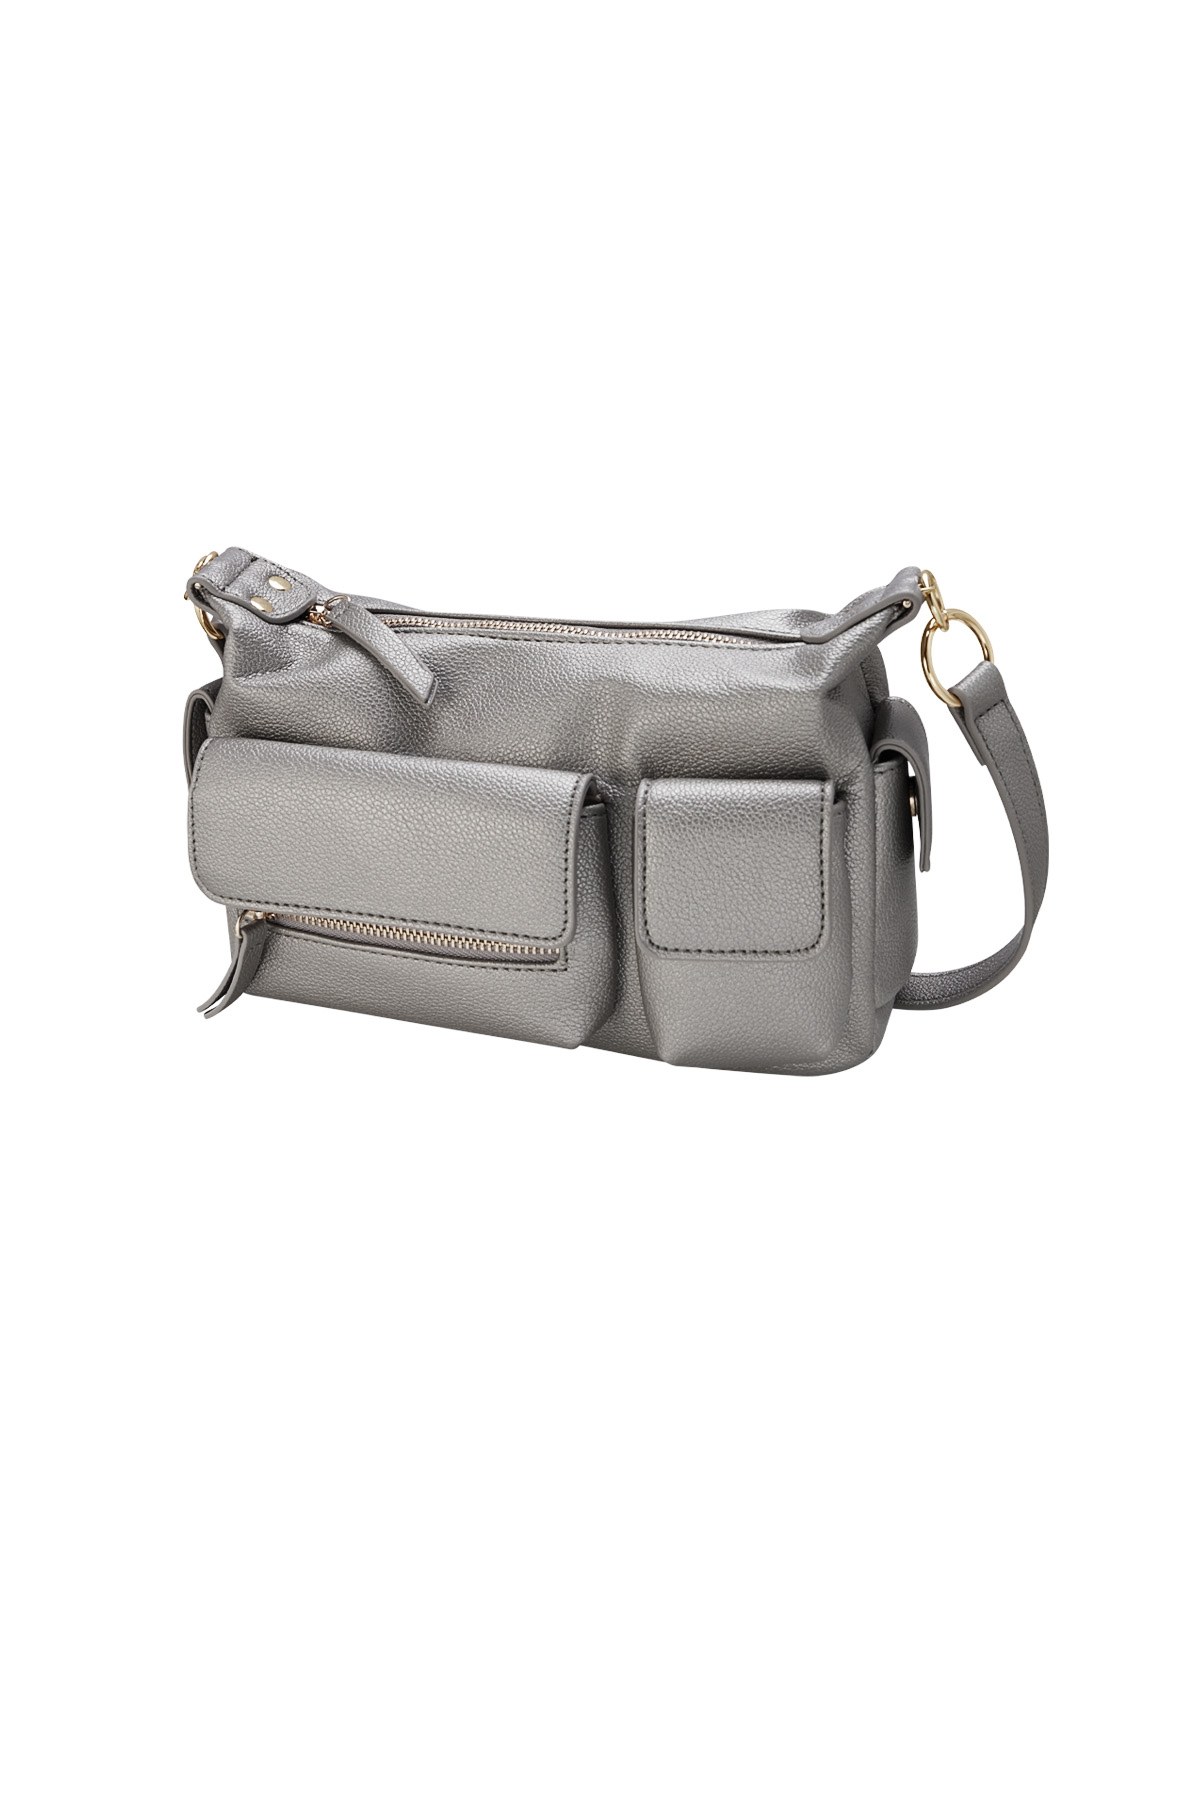 Statement bag with compartments - dark gray 